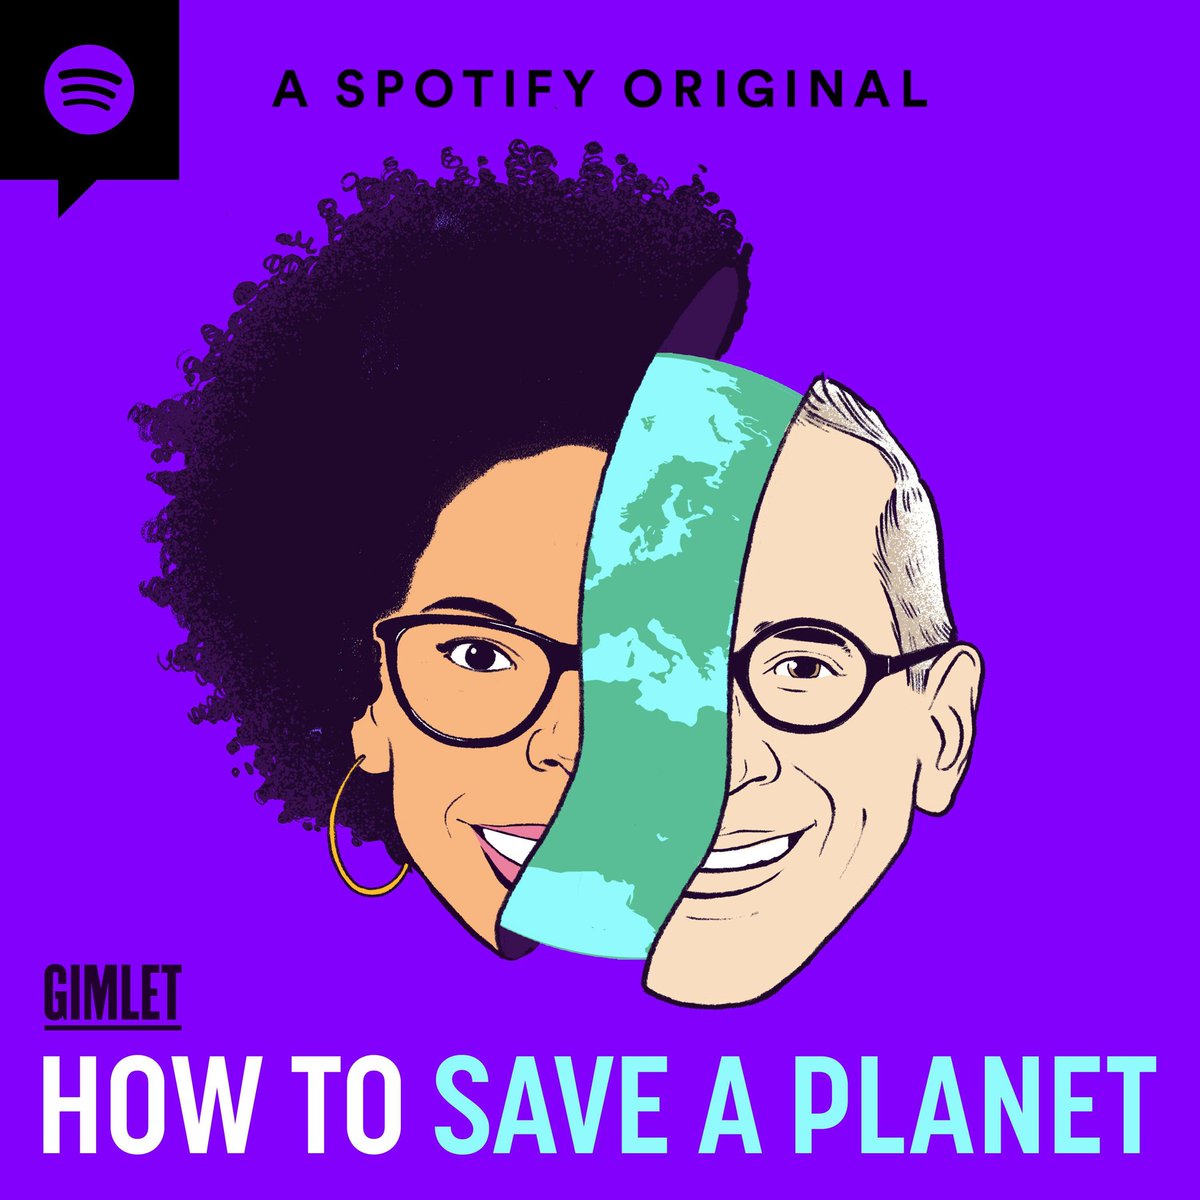 . @how2saveaplanet Podcast InternshipGimlet Media/ @SpotifyTime period of internship: Feb-May 2021Paid Full-time, work-from-home position(I'm a big fan of this podcast, so had to include it!) https://spotifyjobs.com/jobs/how-to-save-a-planet-internship-gimlet